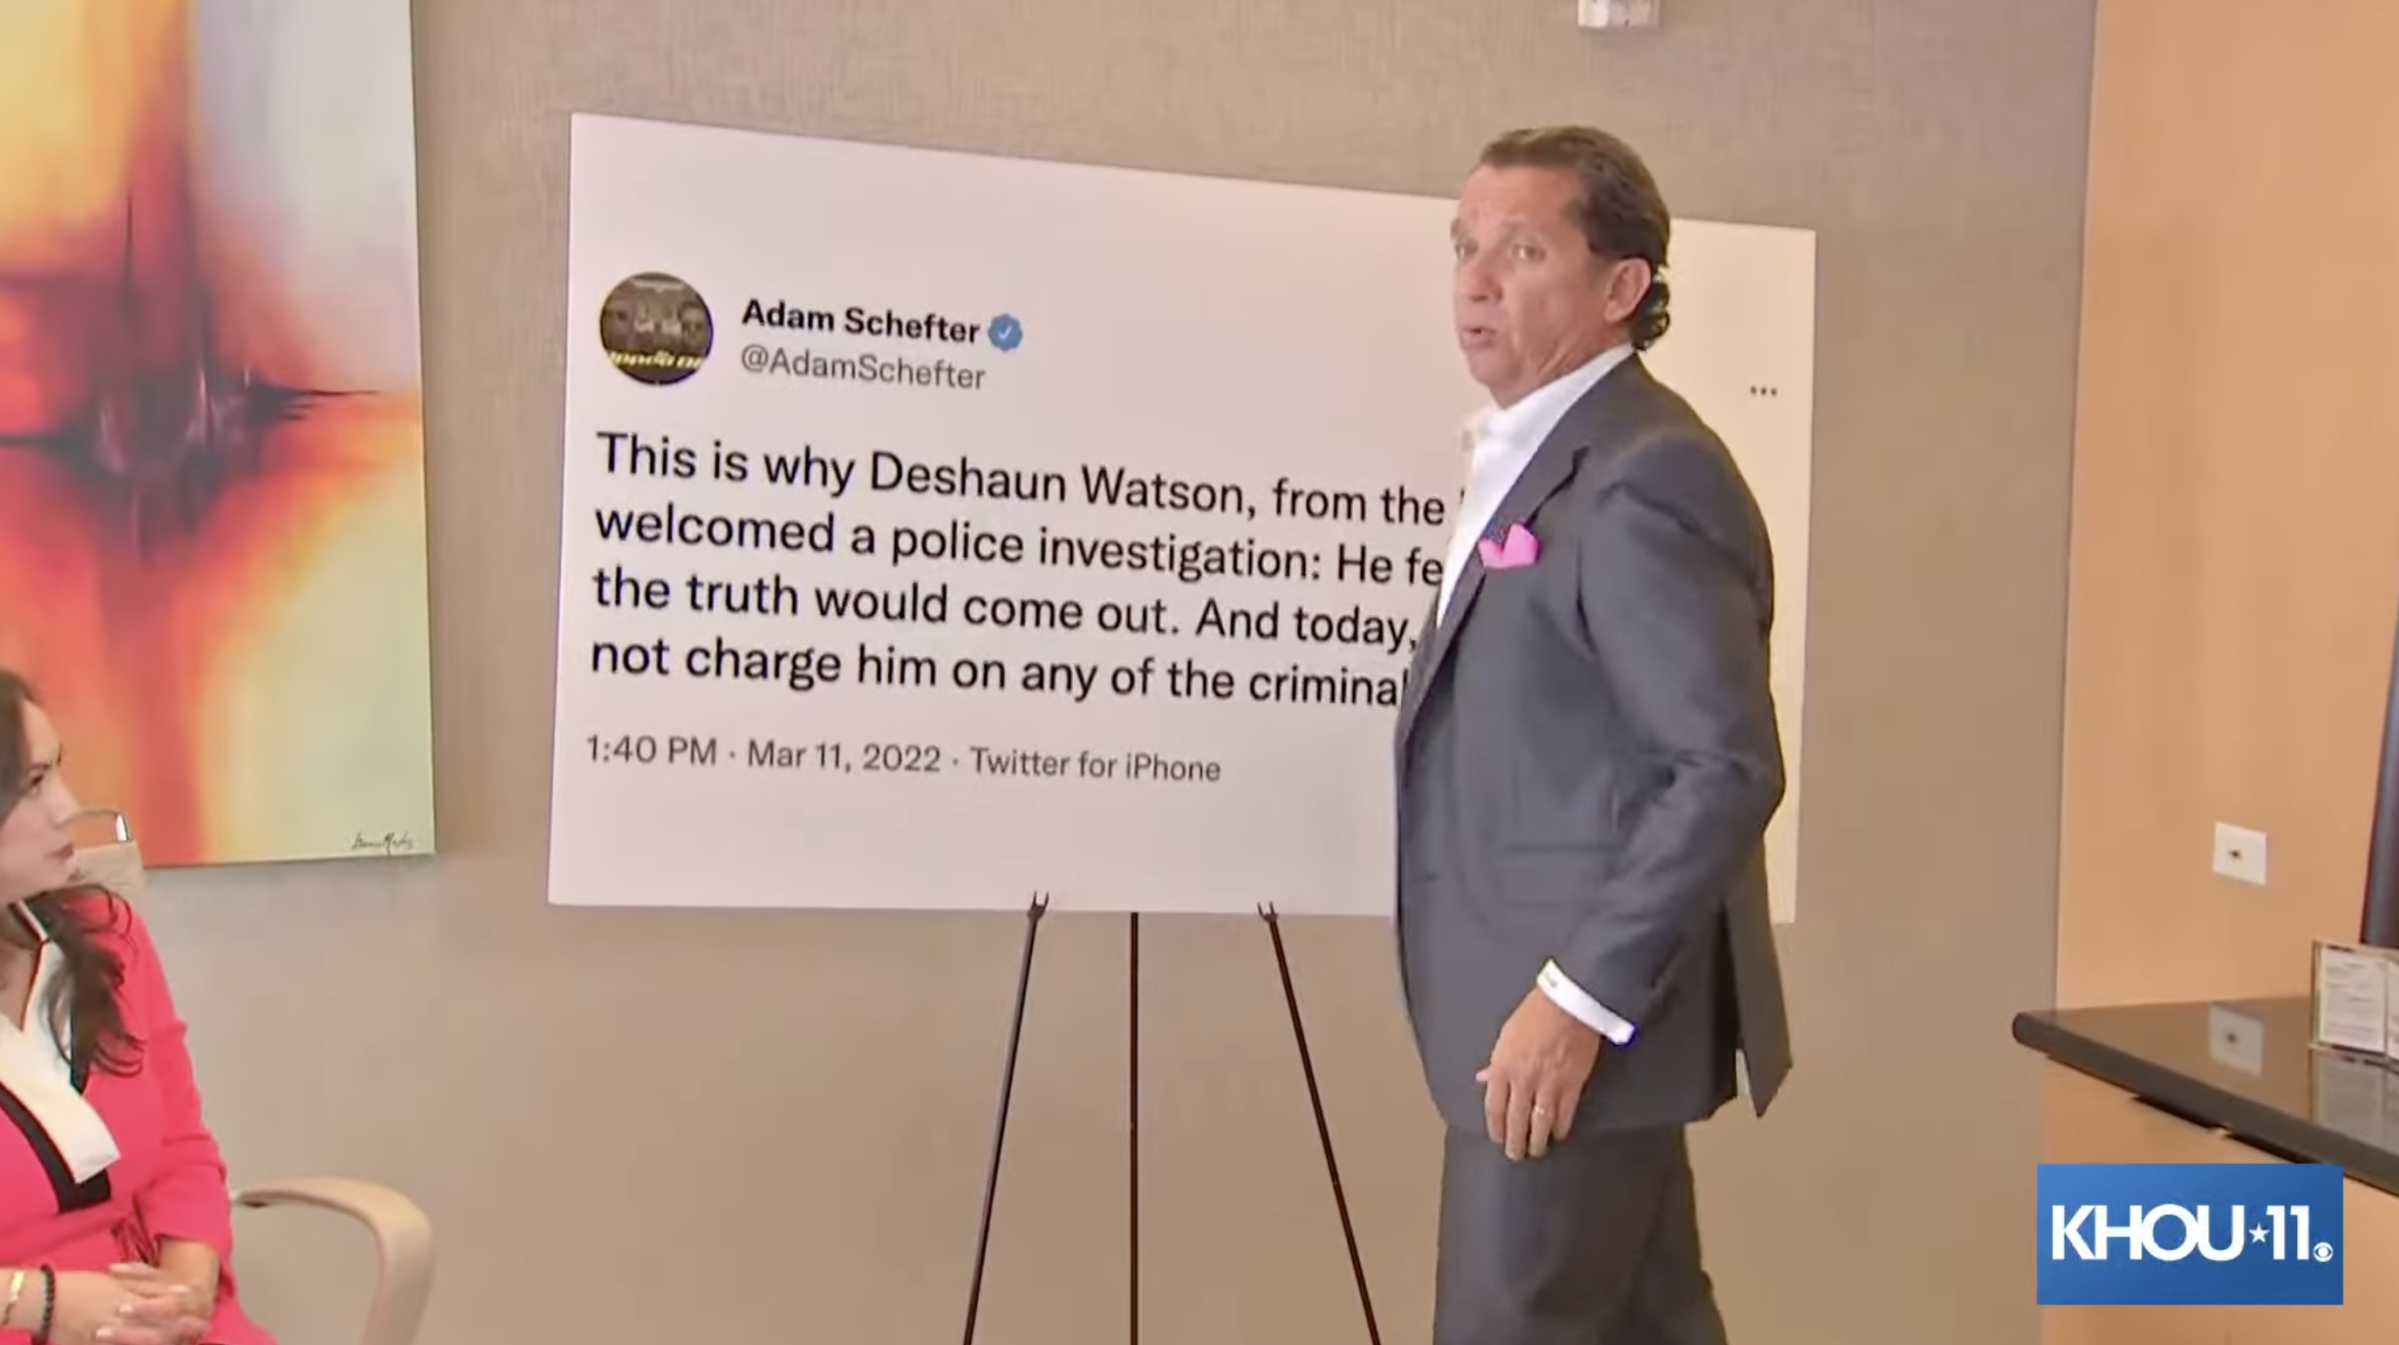 A photo of lawyer Tony Buzbee unveiling a giant blow up of a Adam Schefter tweet. The tweet reads: "This is why Deshaun Watson, from the beginning, welcomed a police investigation: He felt he knew that the truth would come out. And today, a grand jury did not charge him on any of the criminal complaints."